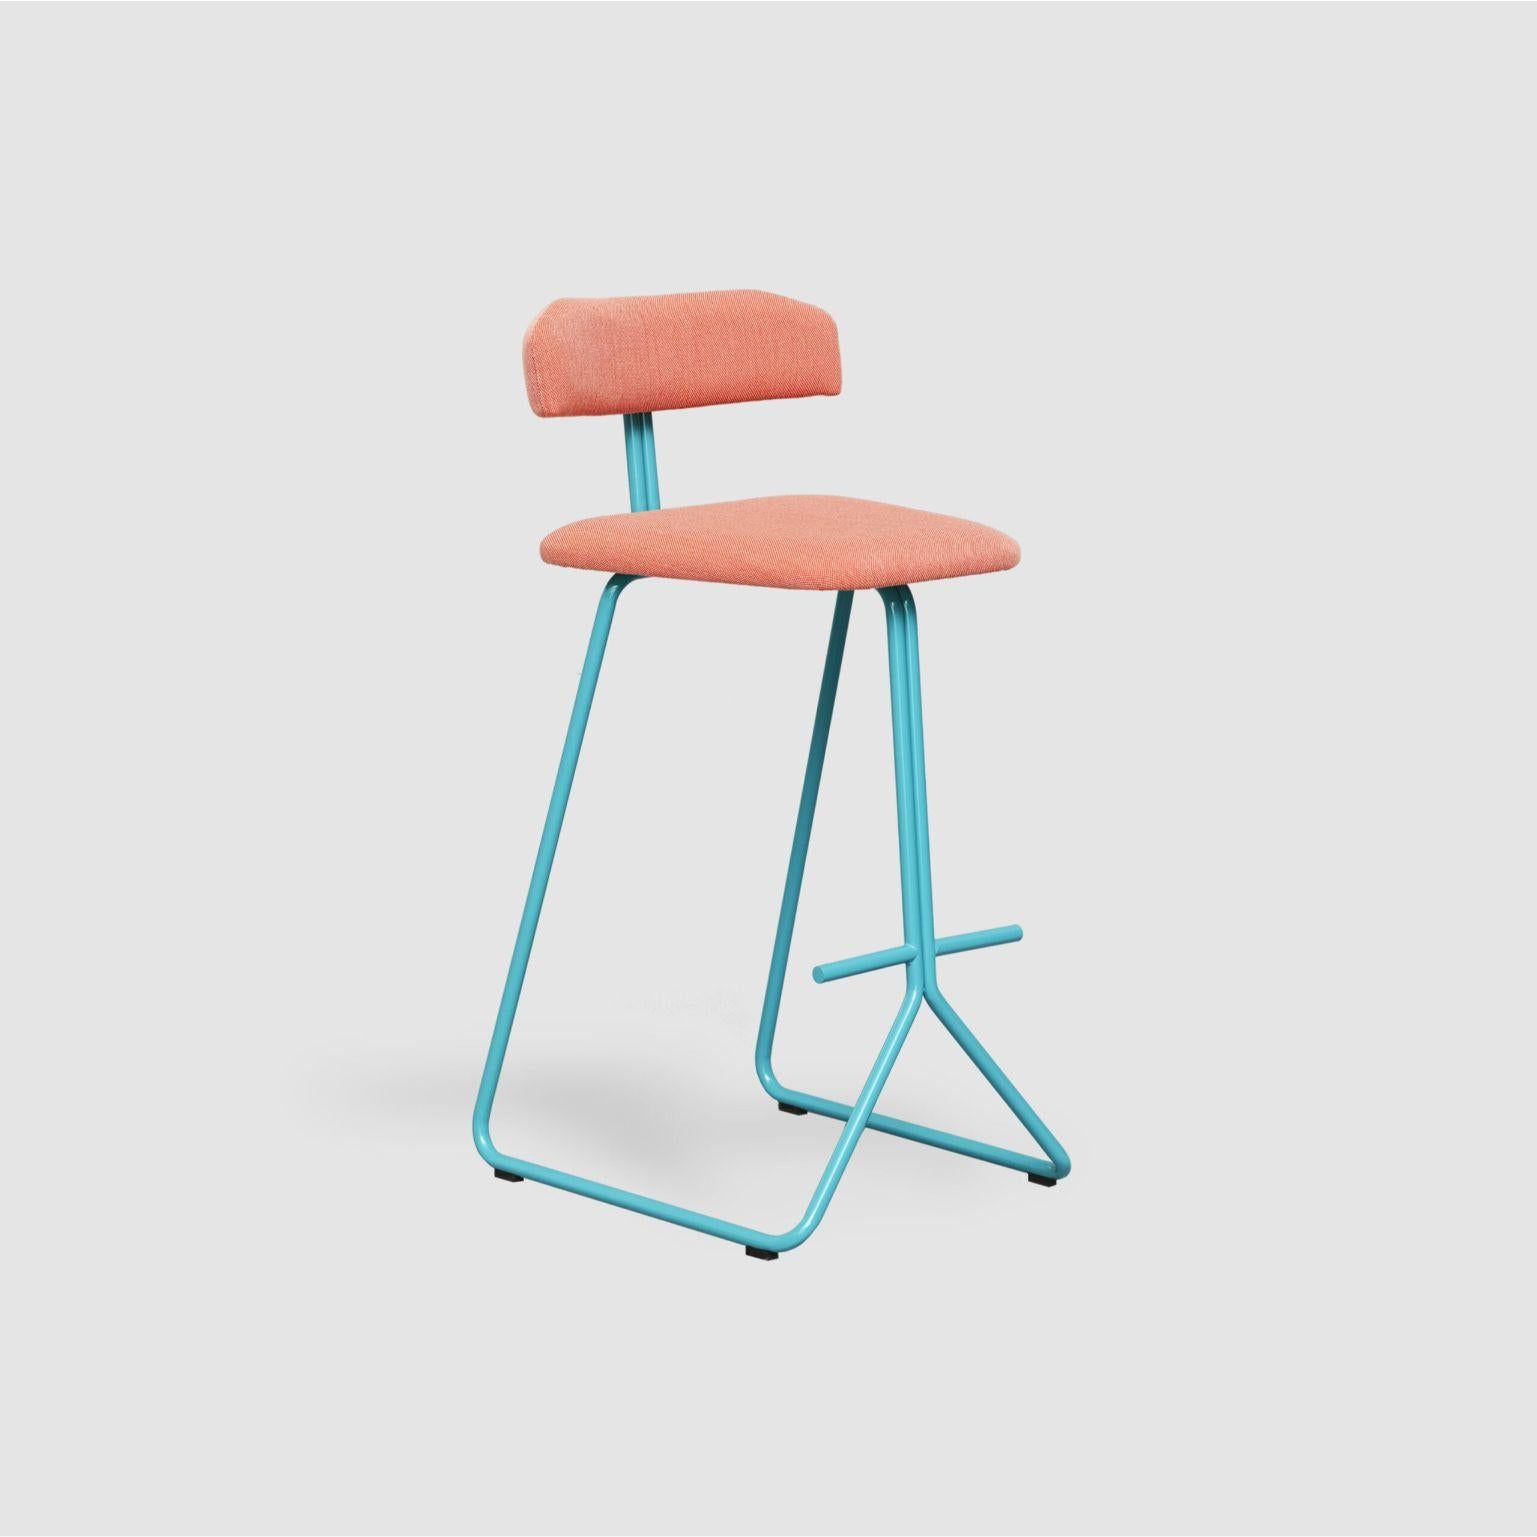 Spanish A Set of Rider Stool & Chair by Pavel Vetrov